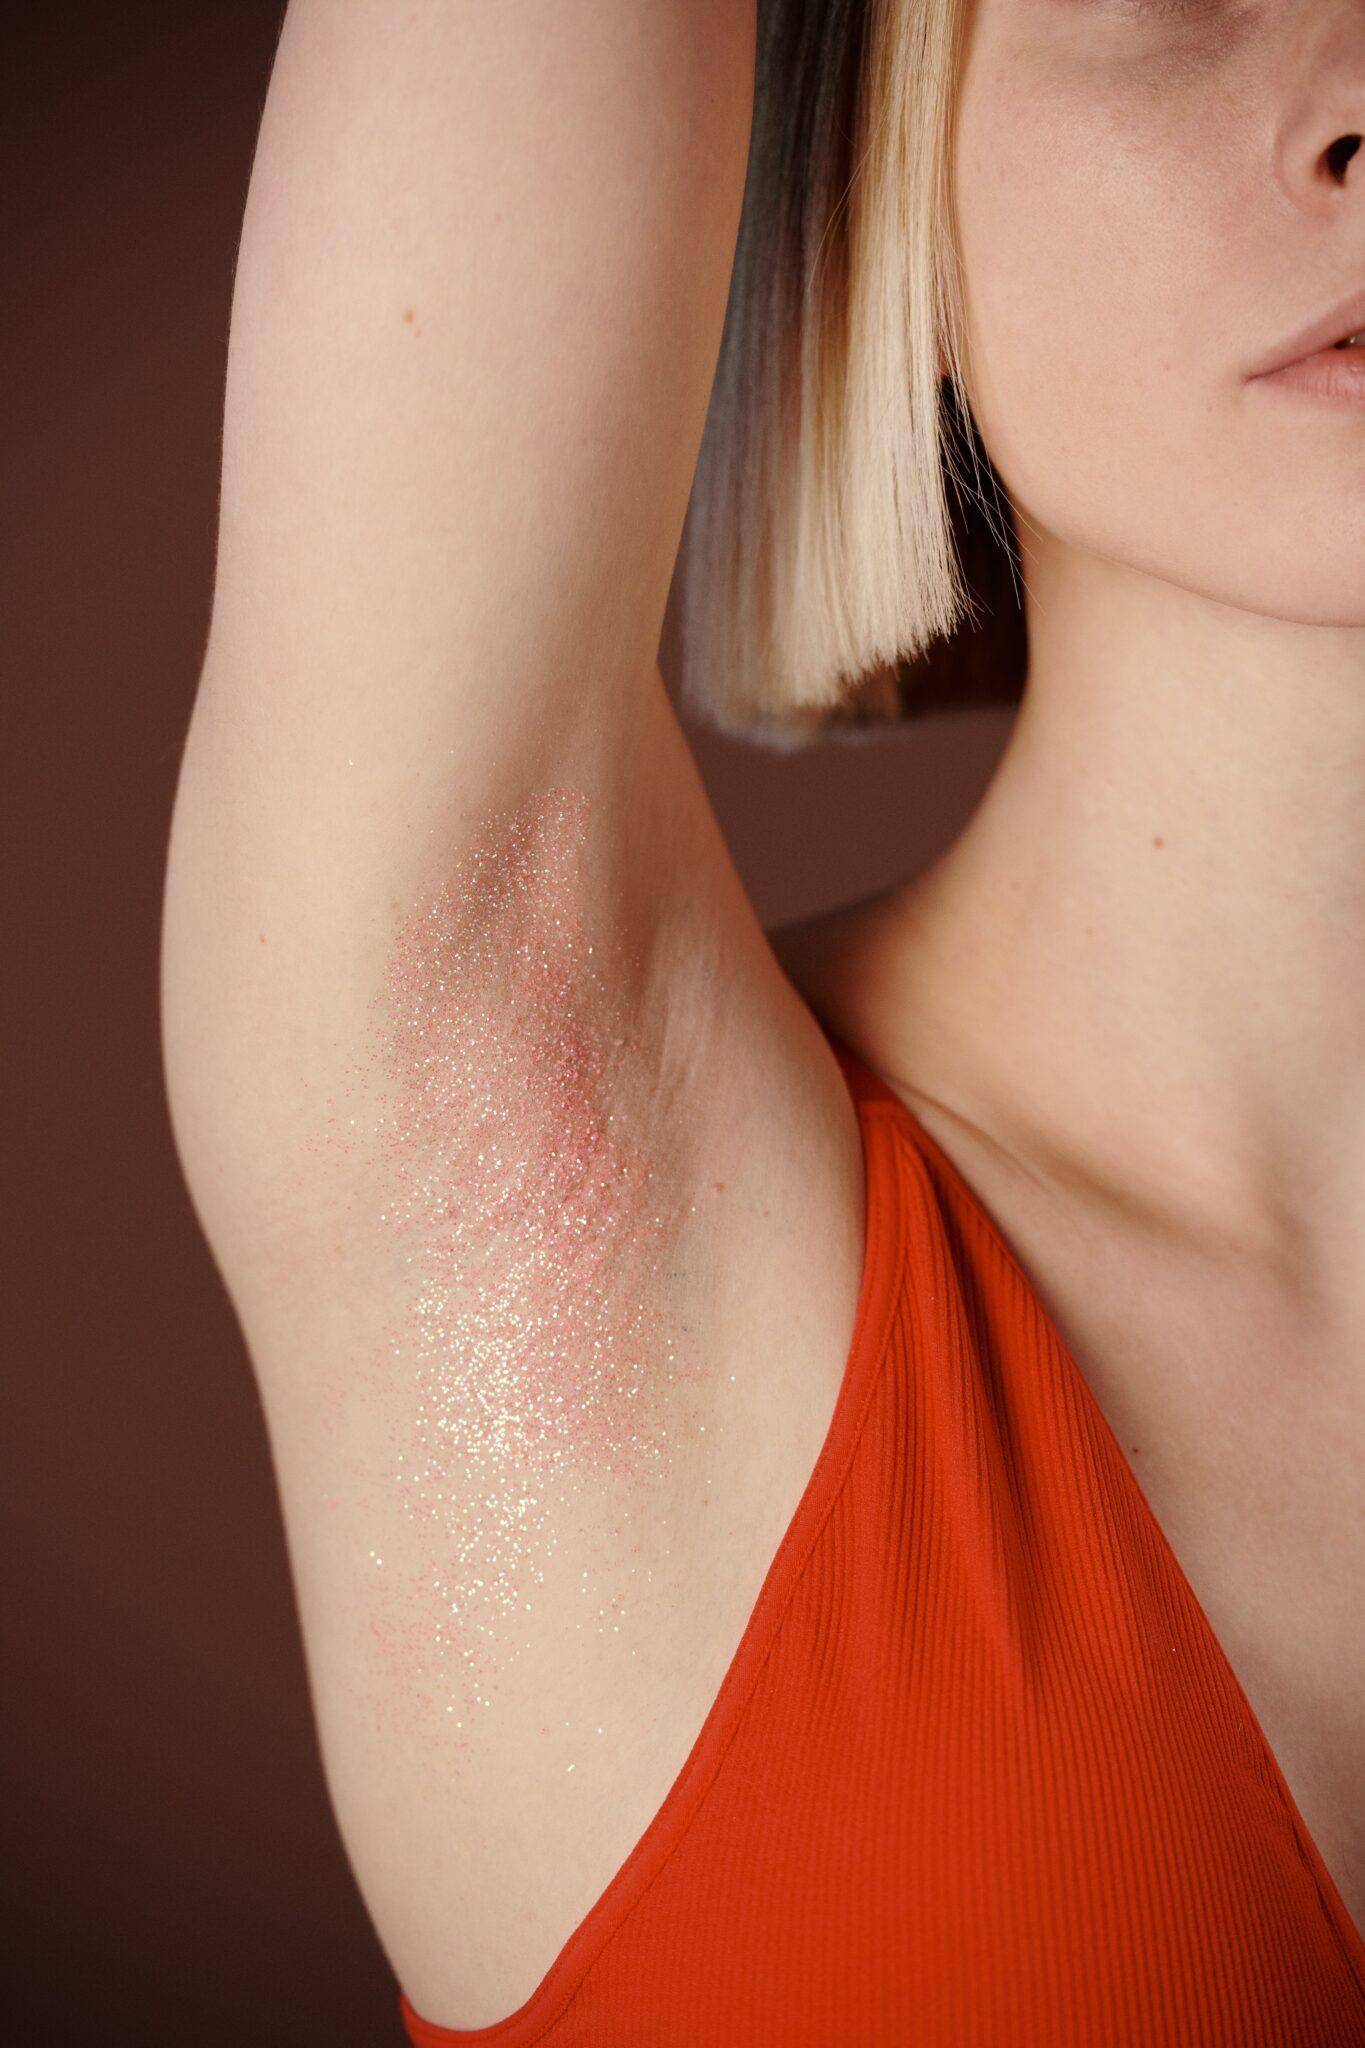 Armpit Rash- What You Need To Know With 4 Important Remedies